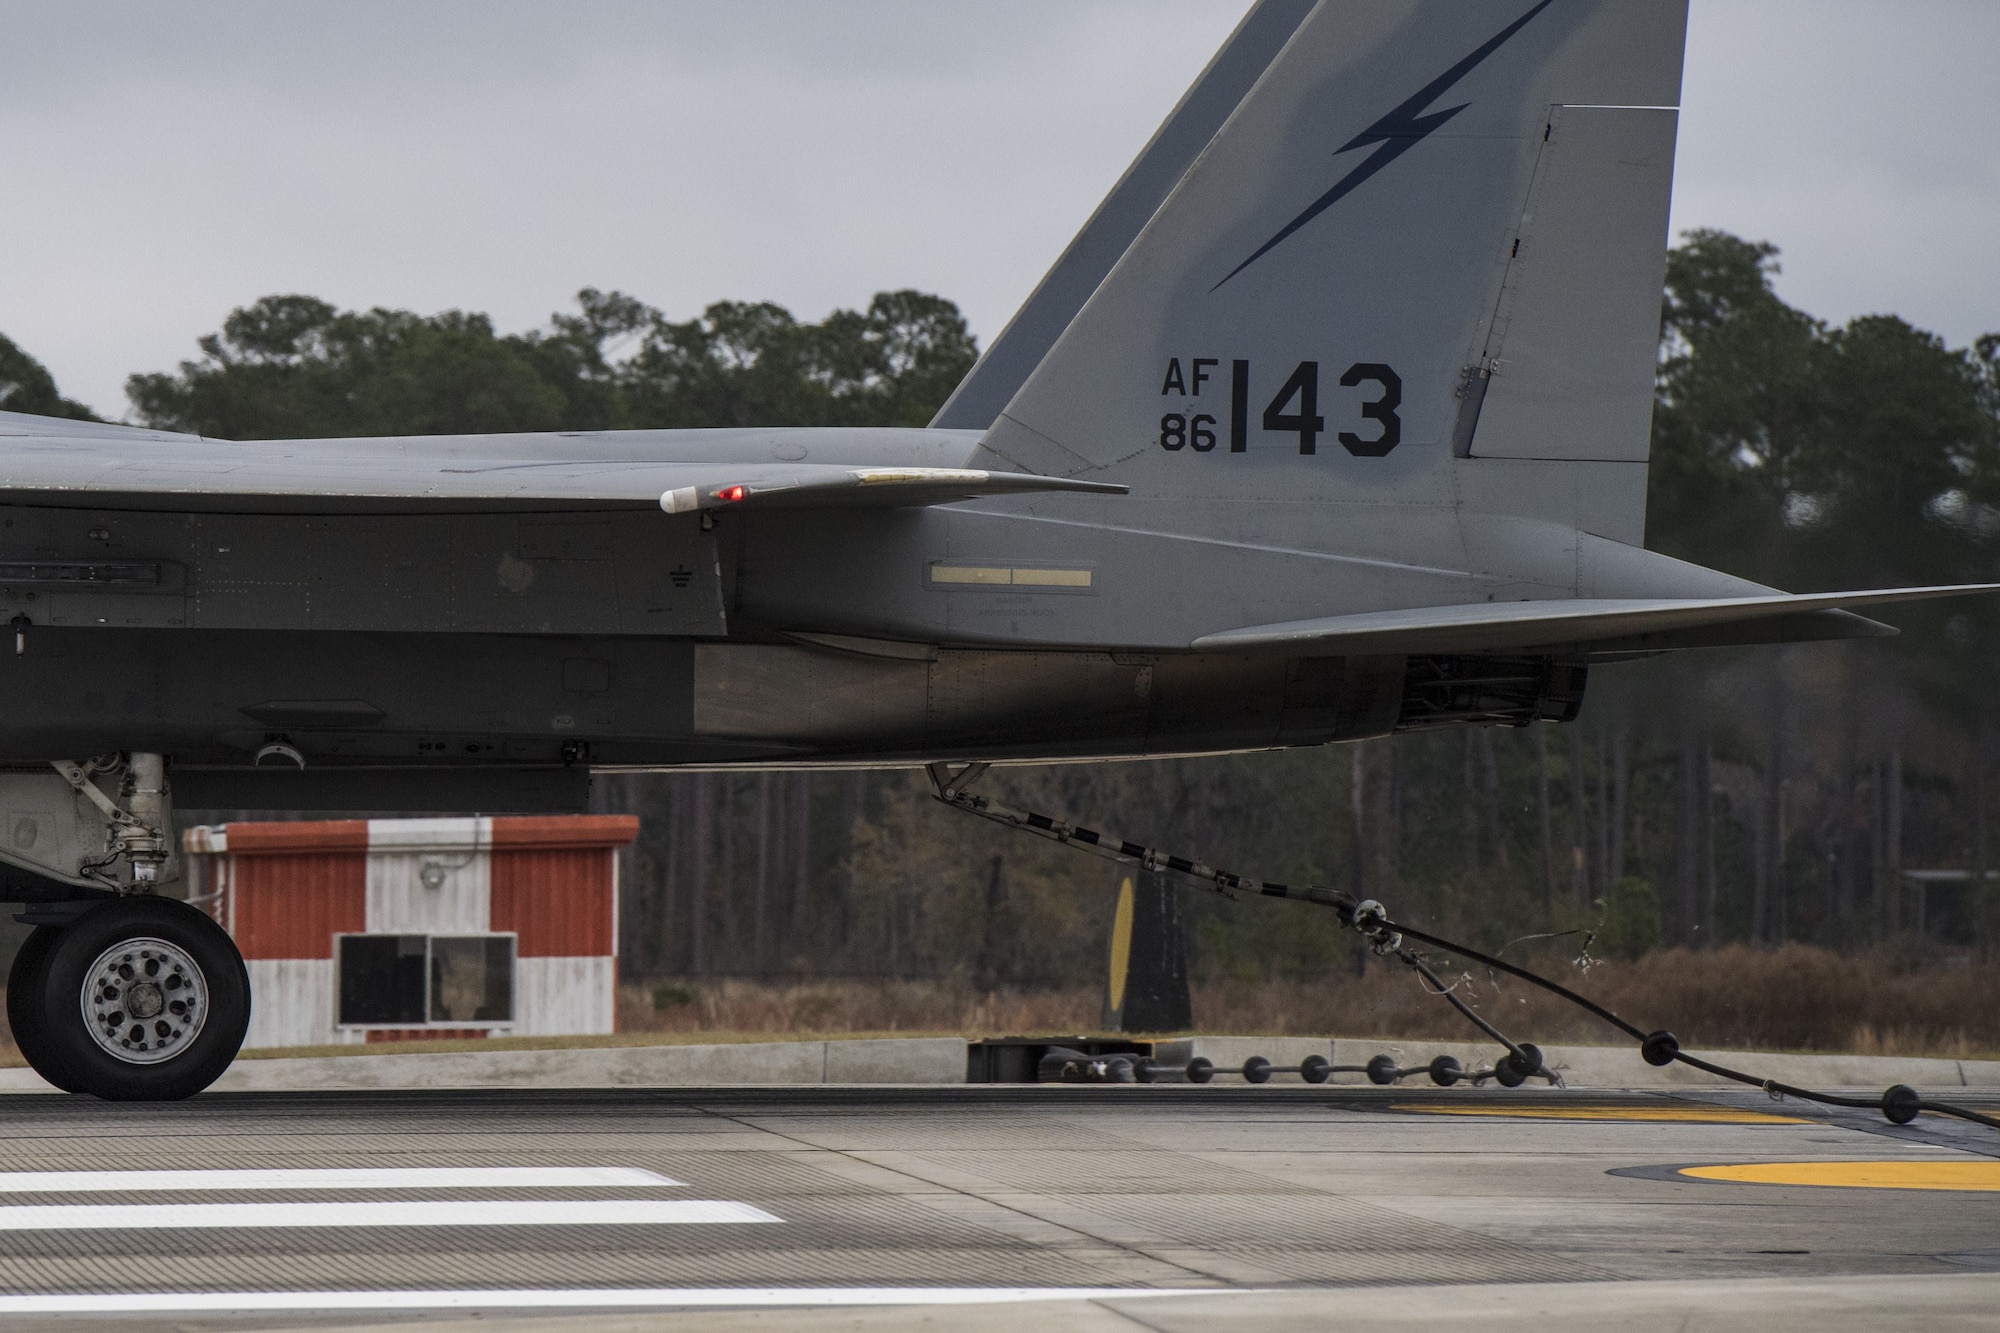 The tail hook on an F-15C Eagle catches the cable of an arresting system, Dec. 19, 2017, at Moody Air Force Base, Ga. The BAK-12 arresting system is used on the runway to slow down fighter aircraft in emergency situations. (U.S. Air Force photo by Senior Airman Janiqua P. Robinson)